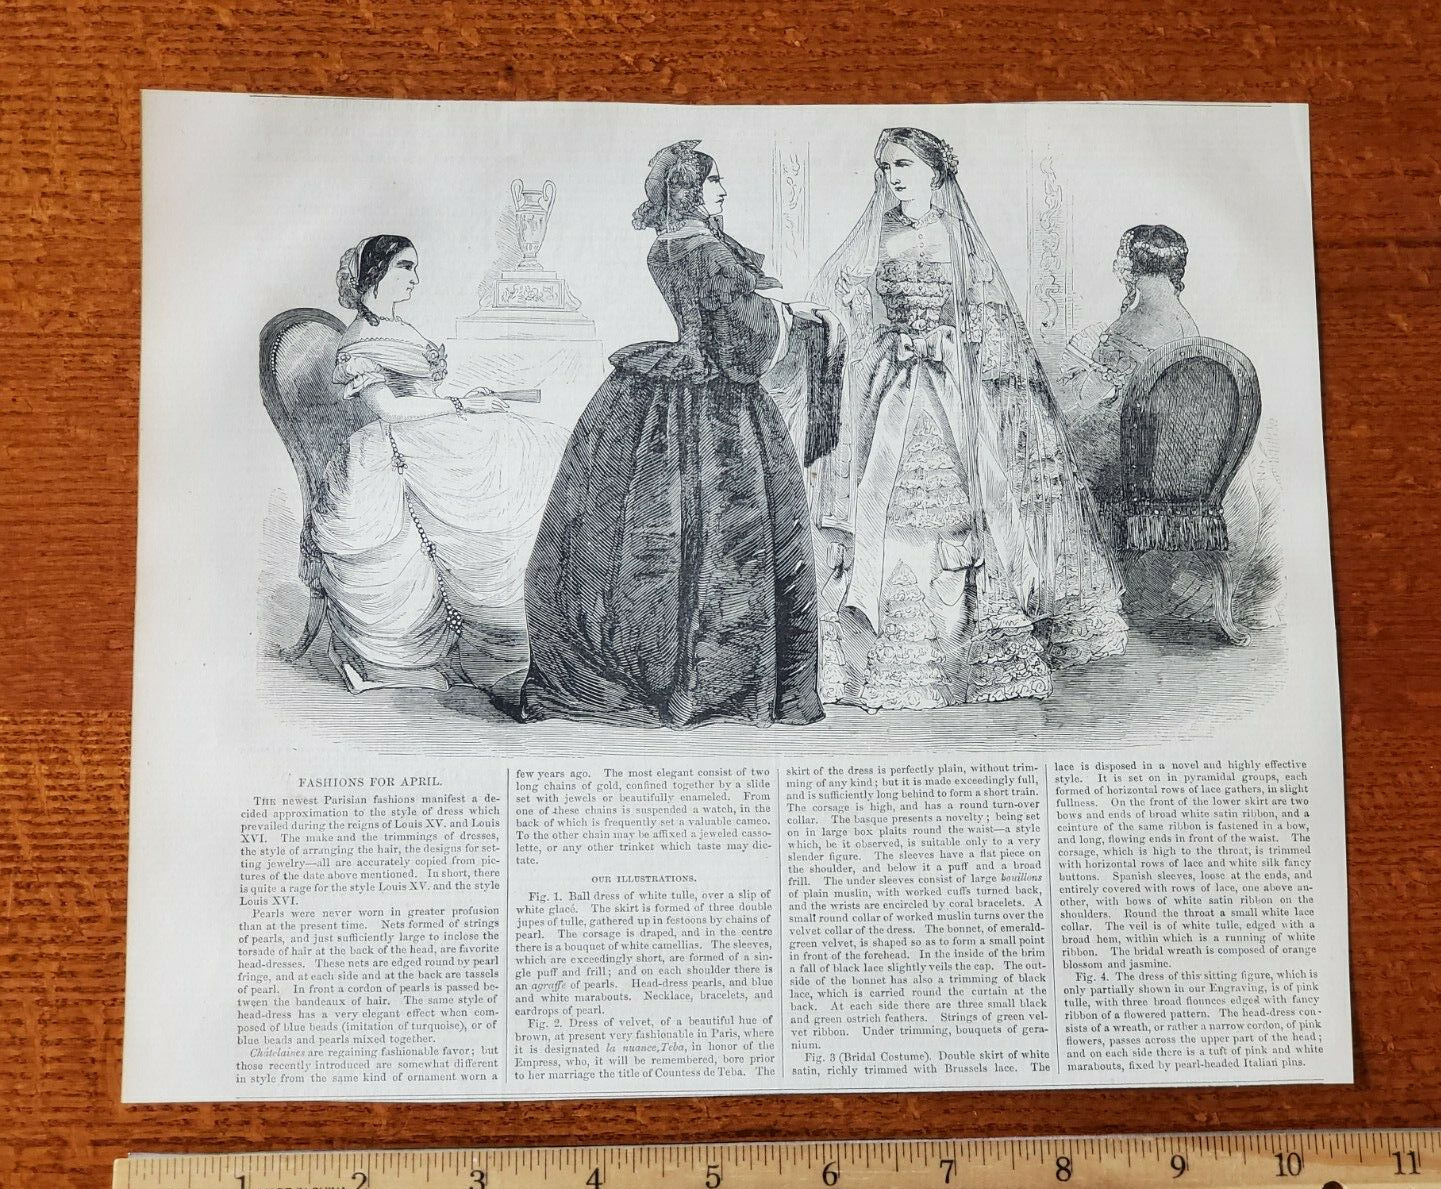 Harper's Weekly 1857 Sketch FASHION FOR APRIL